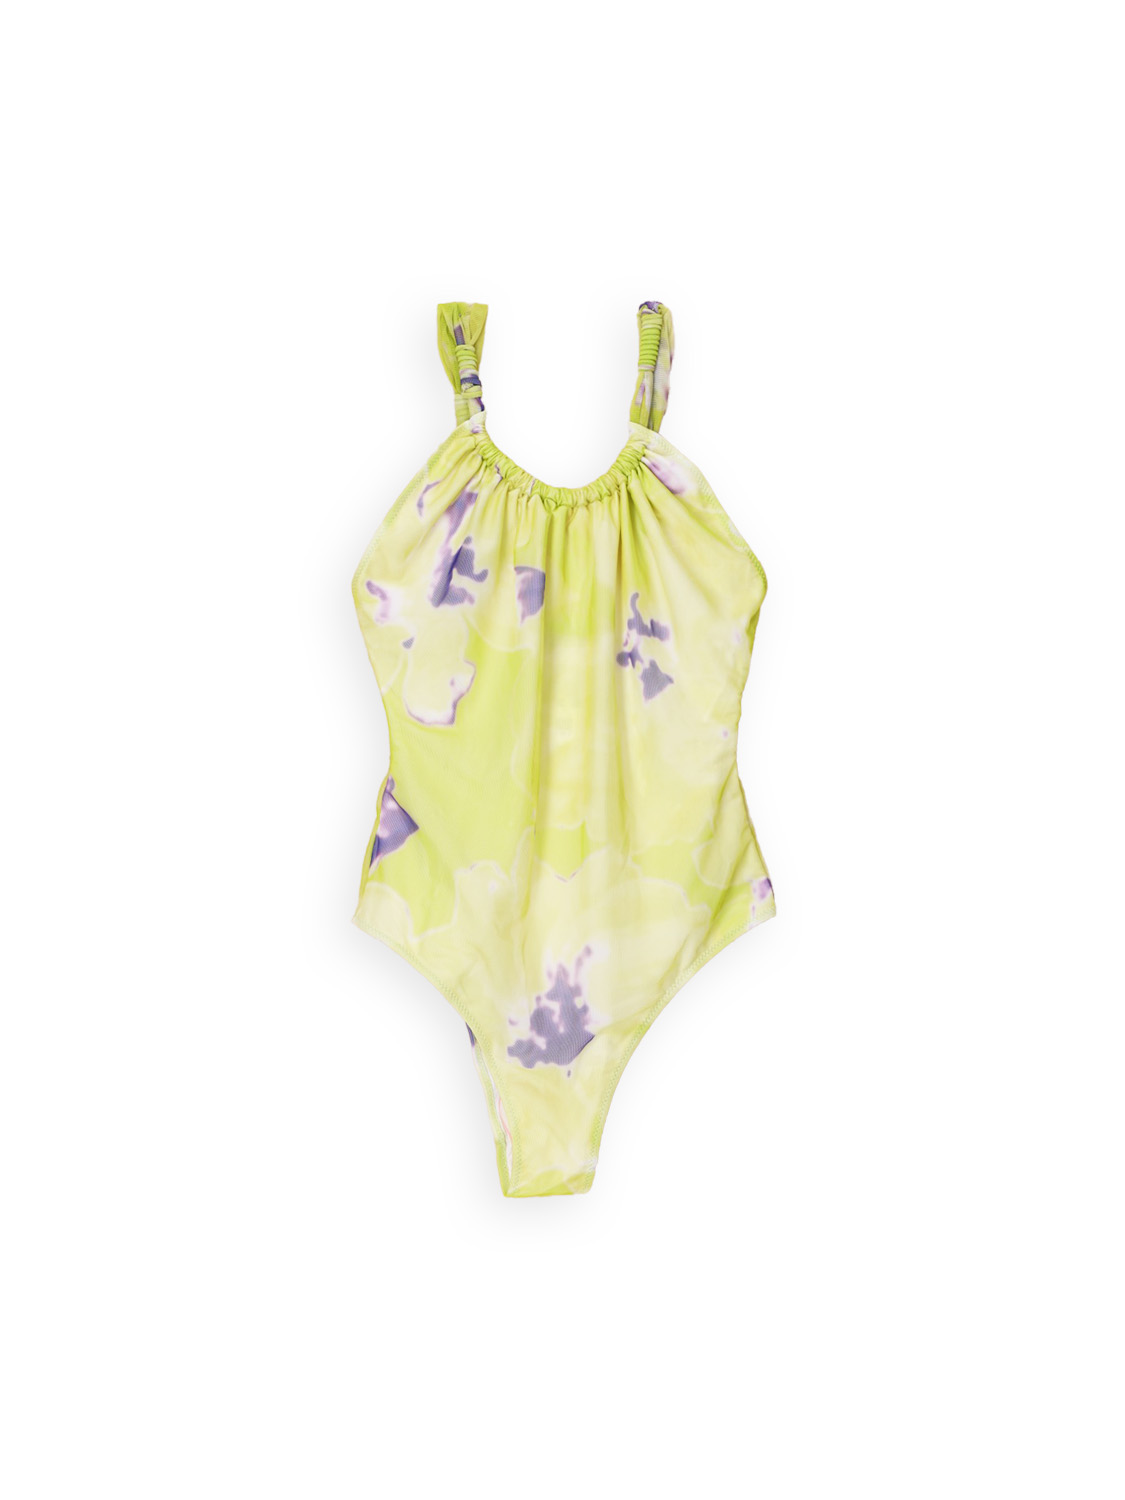 Stretchy swimsuit with a tie-dye pattern 